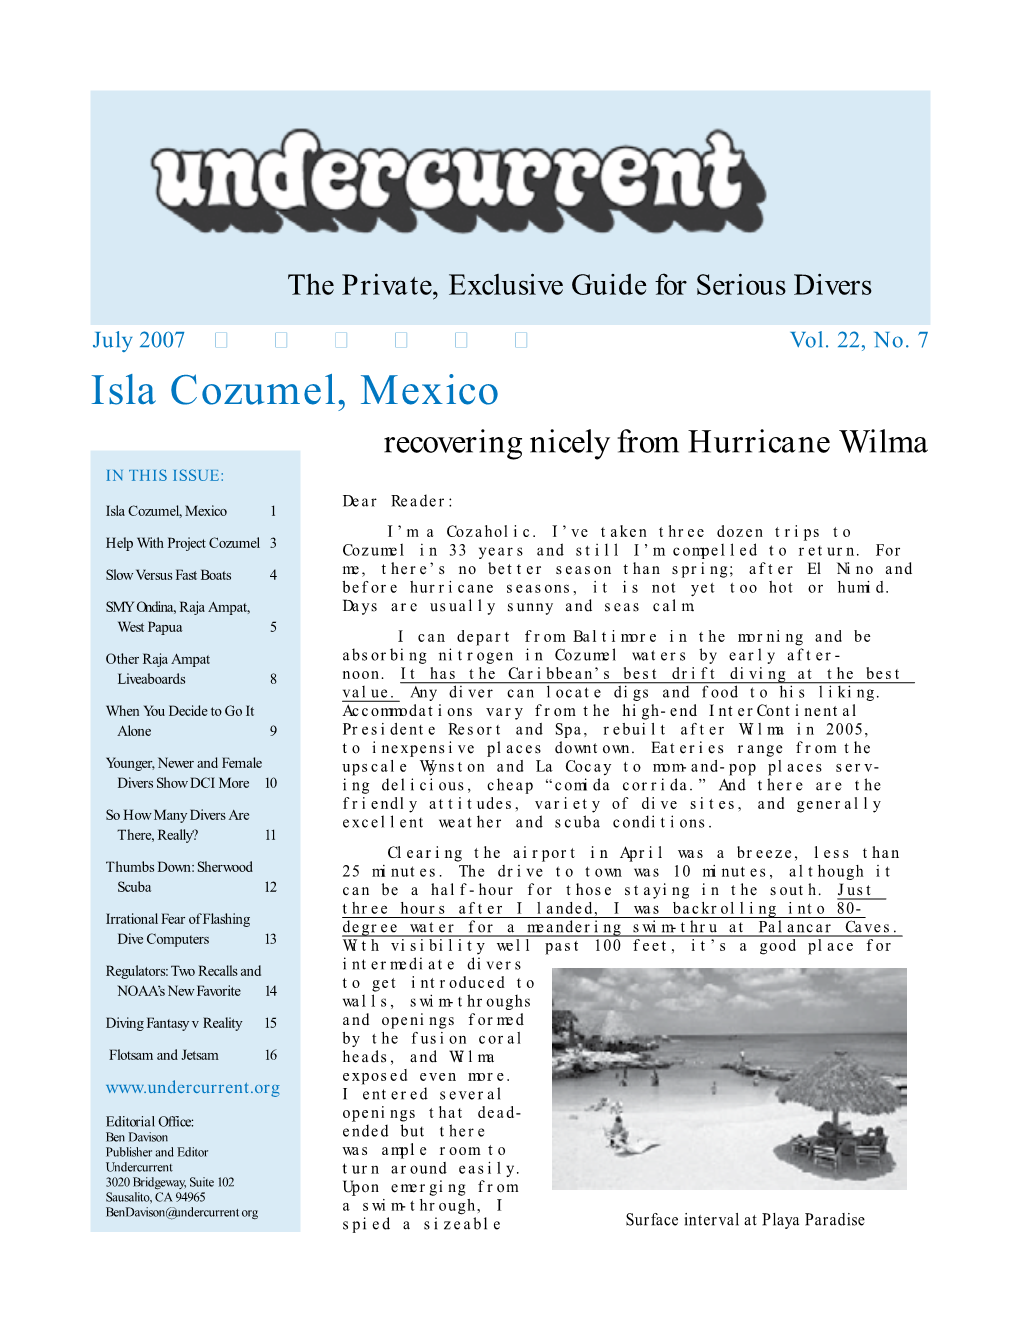 Isla Cozumel, Mexico + [Other Articles] Undercurrent, July 2007